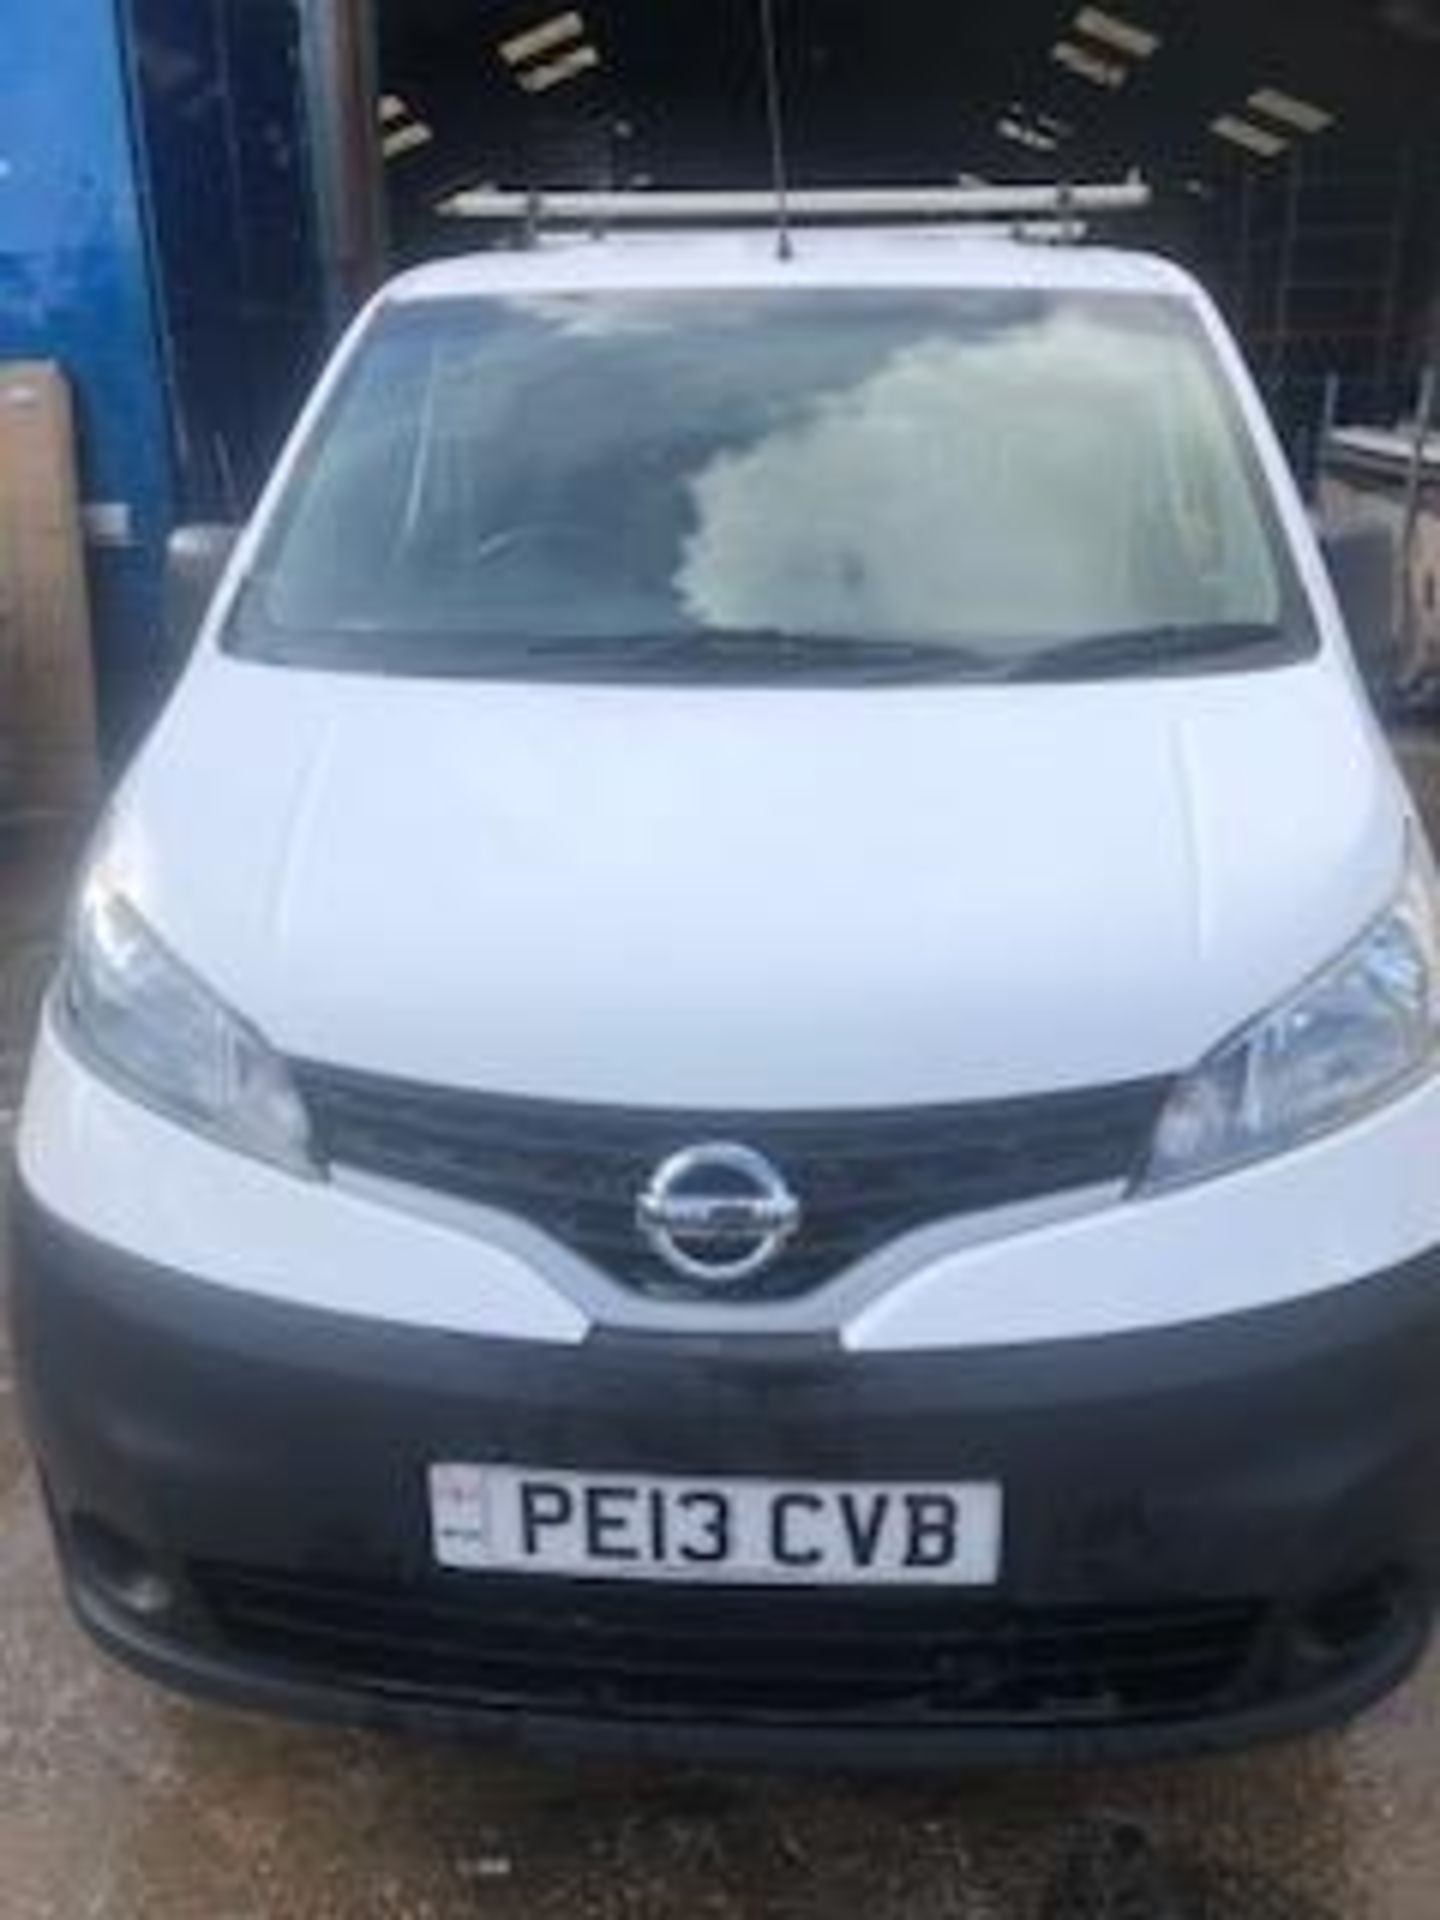 Nissan Nv200, 1.5 Dci - Image 2 of 8